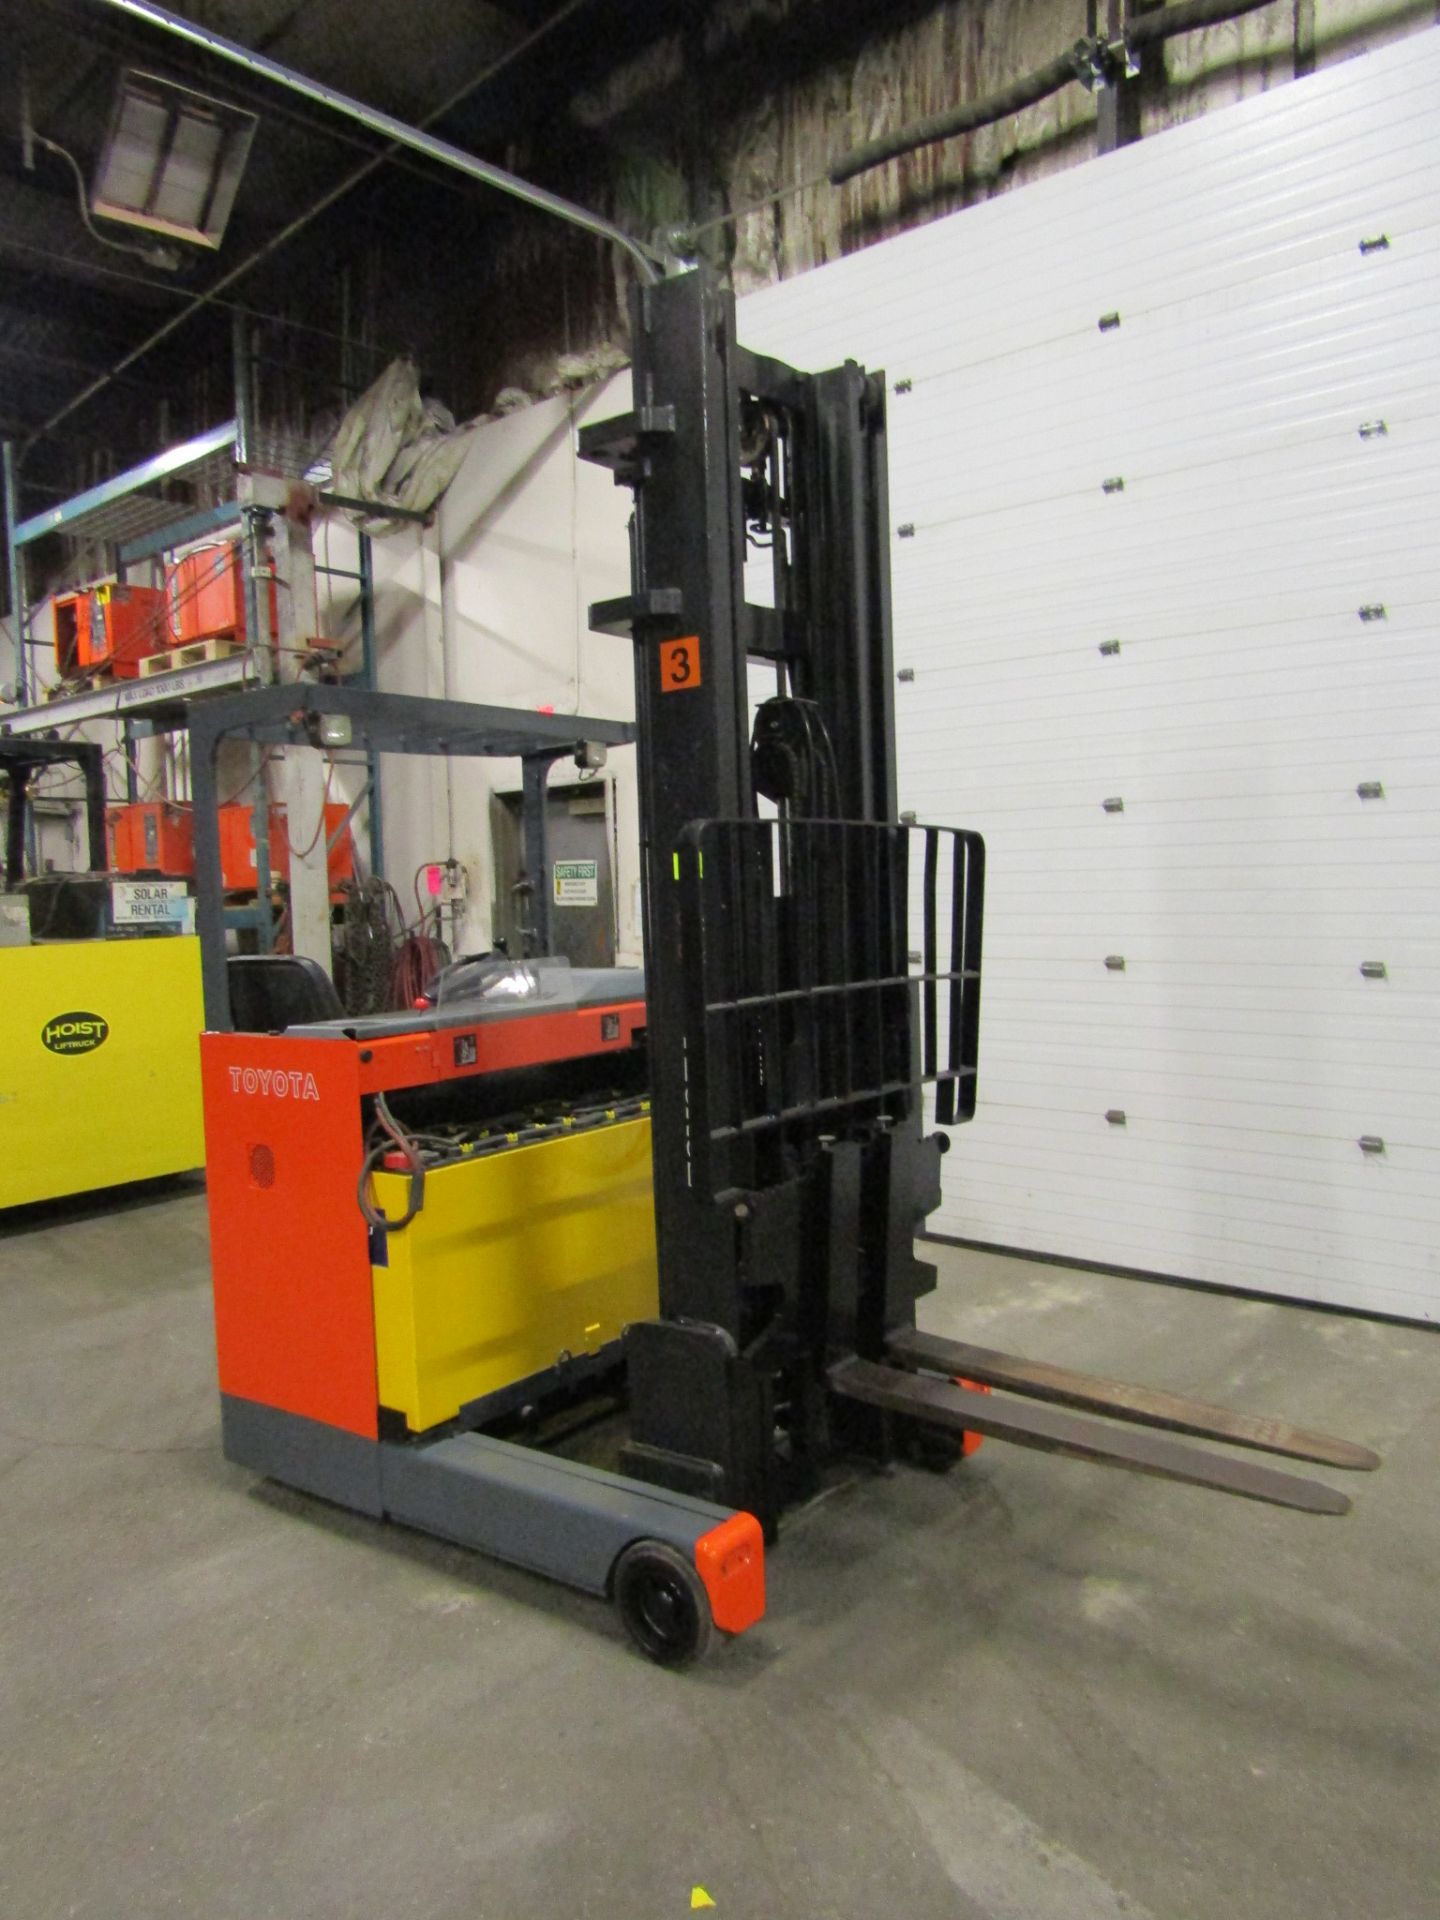 Toyota Standup Warehouse Forklift REACH TRUCK unit with 3-stage mast - 3200lbs Capacity - Image 2 of 3